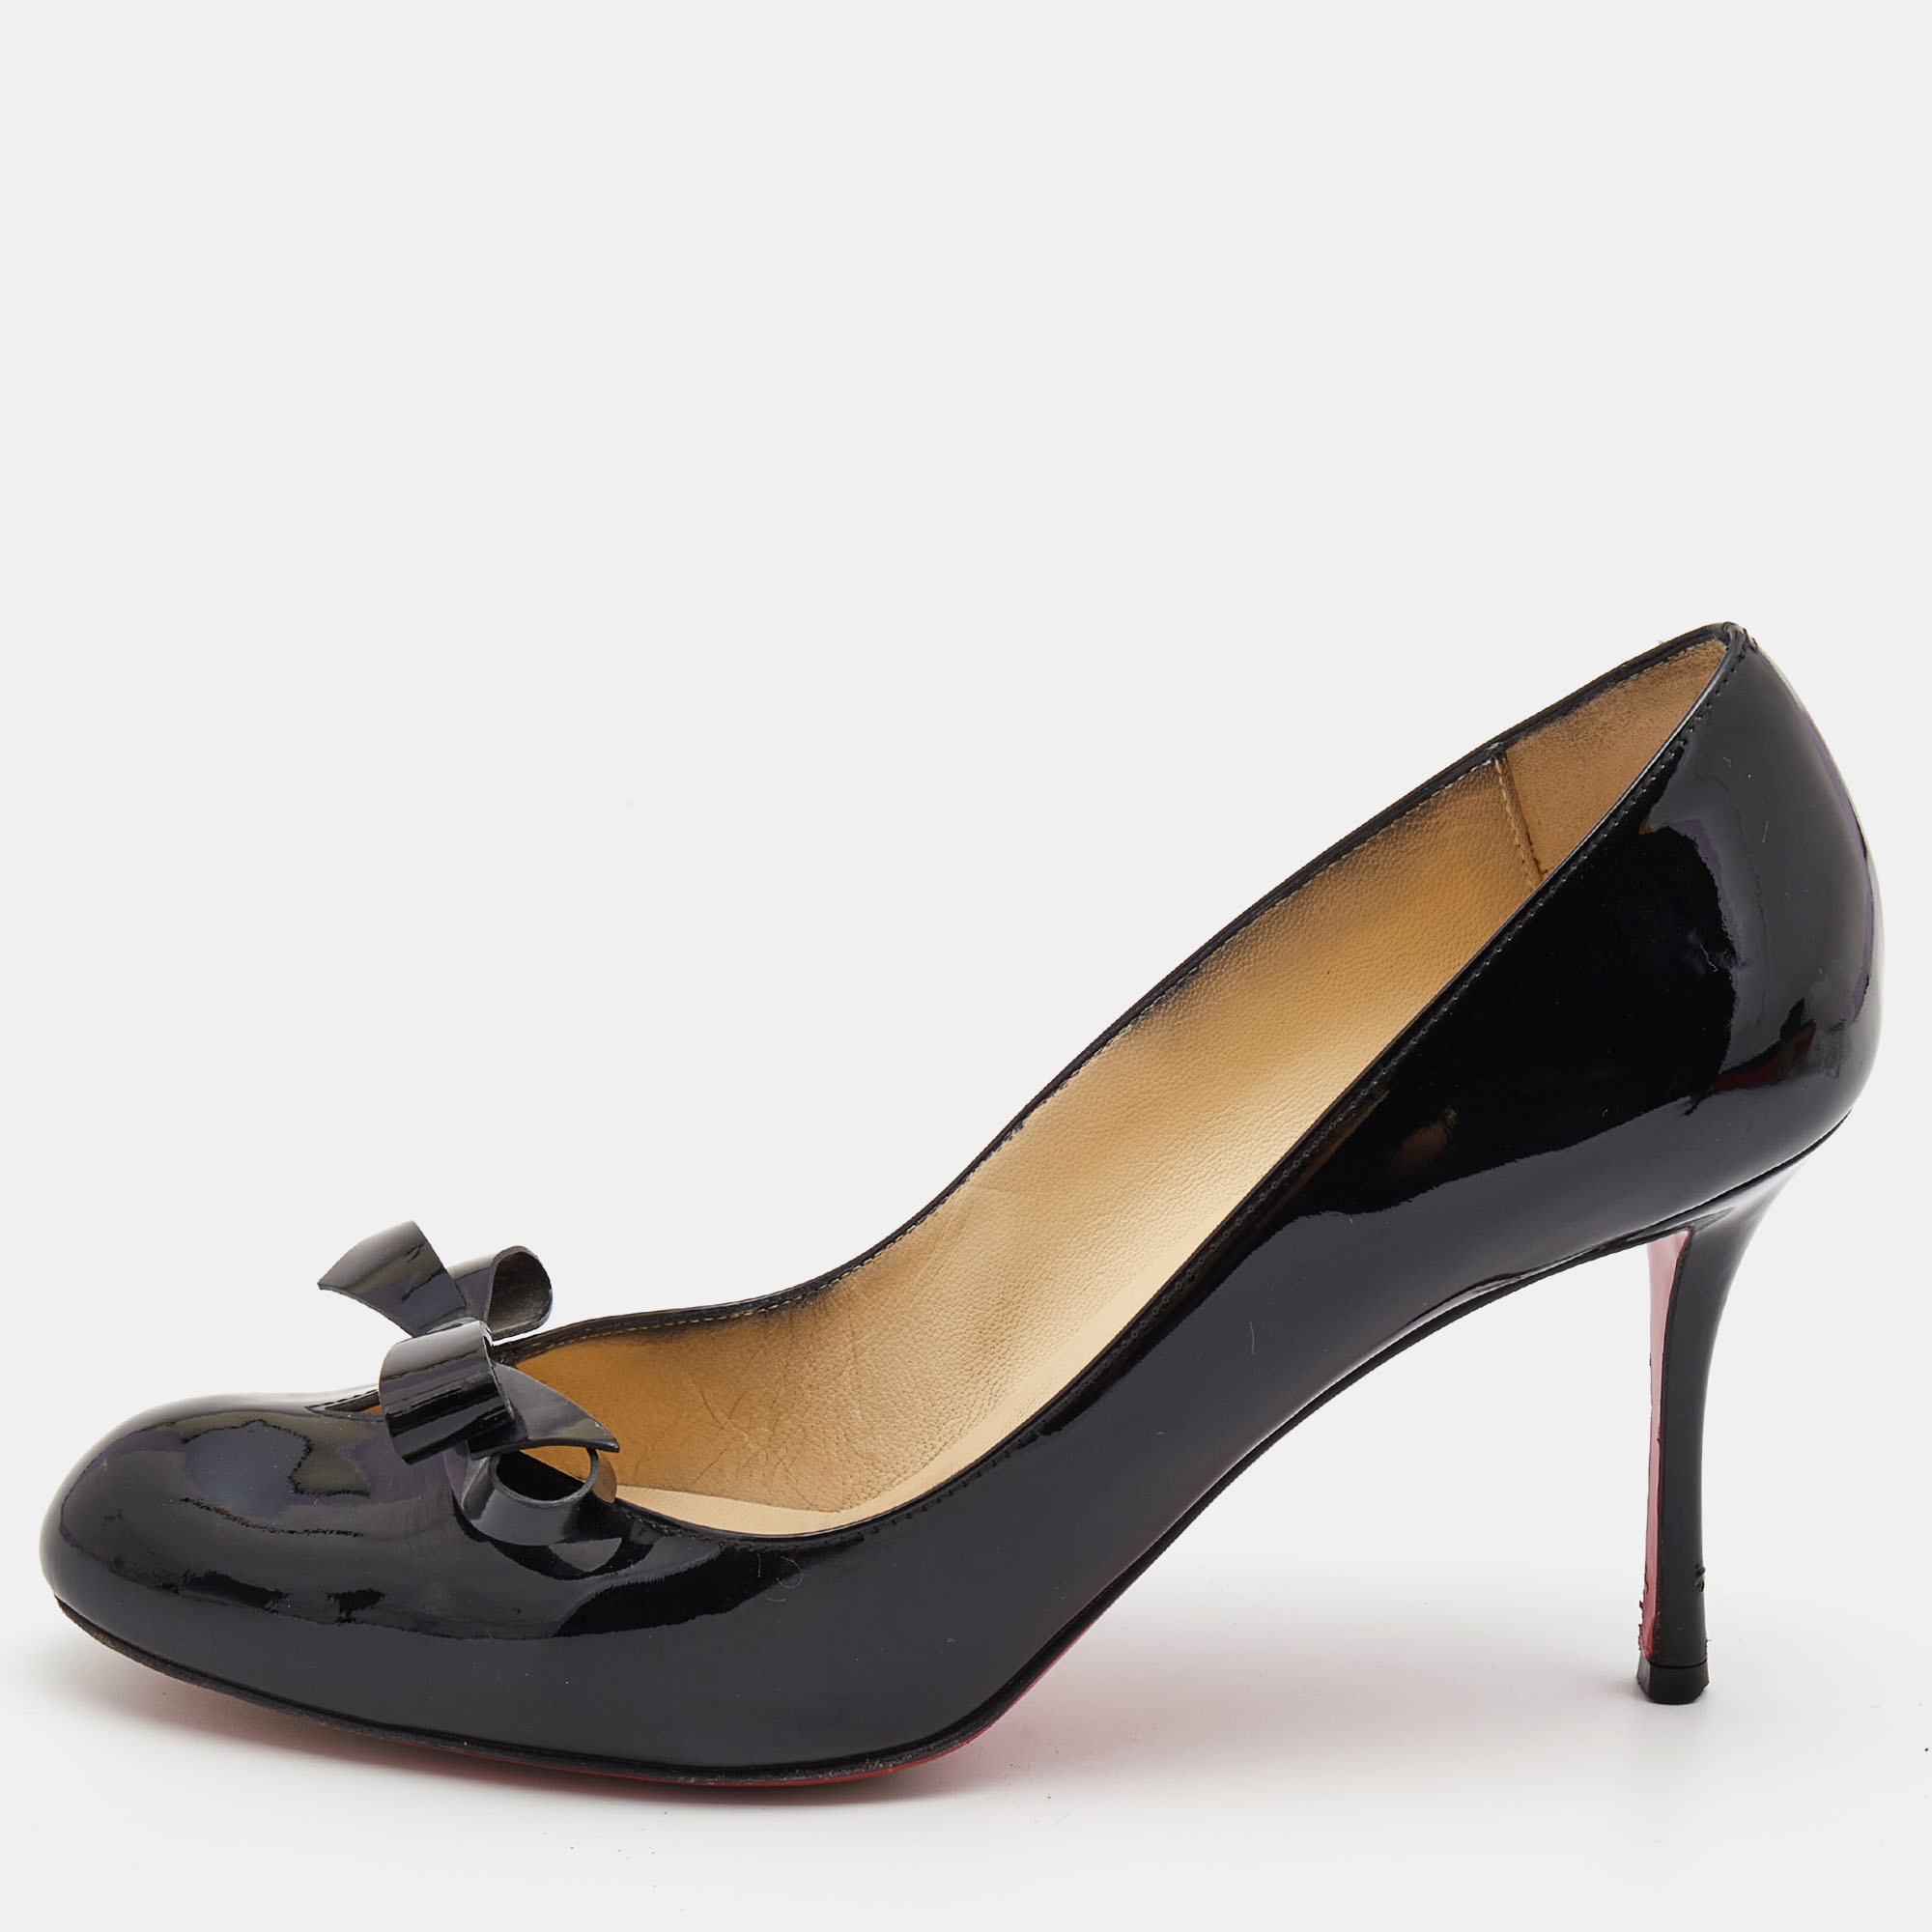 Pre-owned Christian Louboutin Black Patent Leather Vinodo Pumps Size 38.5